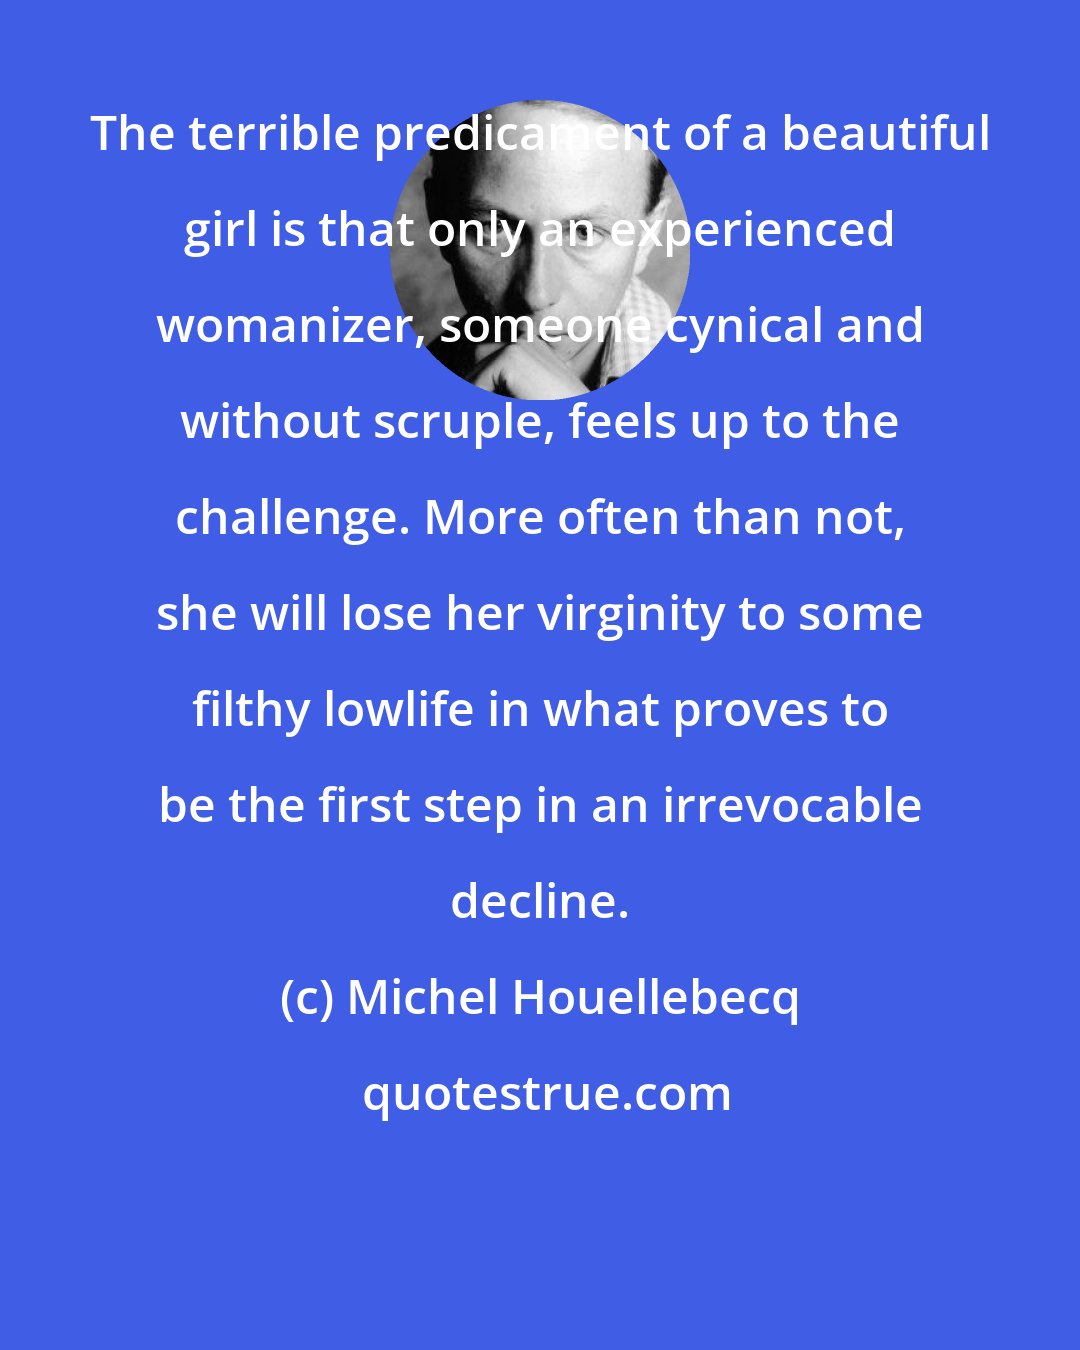 Michel Houellebecq: The terrible predicament of a beautiful girl is that only an experienced womanizer, someone cynical and without scruple, feels up to the challenge. More often than not, she will lose her virginity to some filthy lowlife in what proves to be the first step in an irrevocable decline.